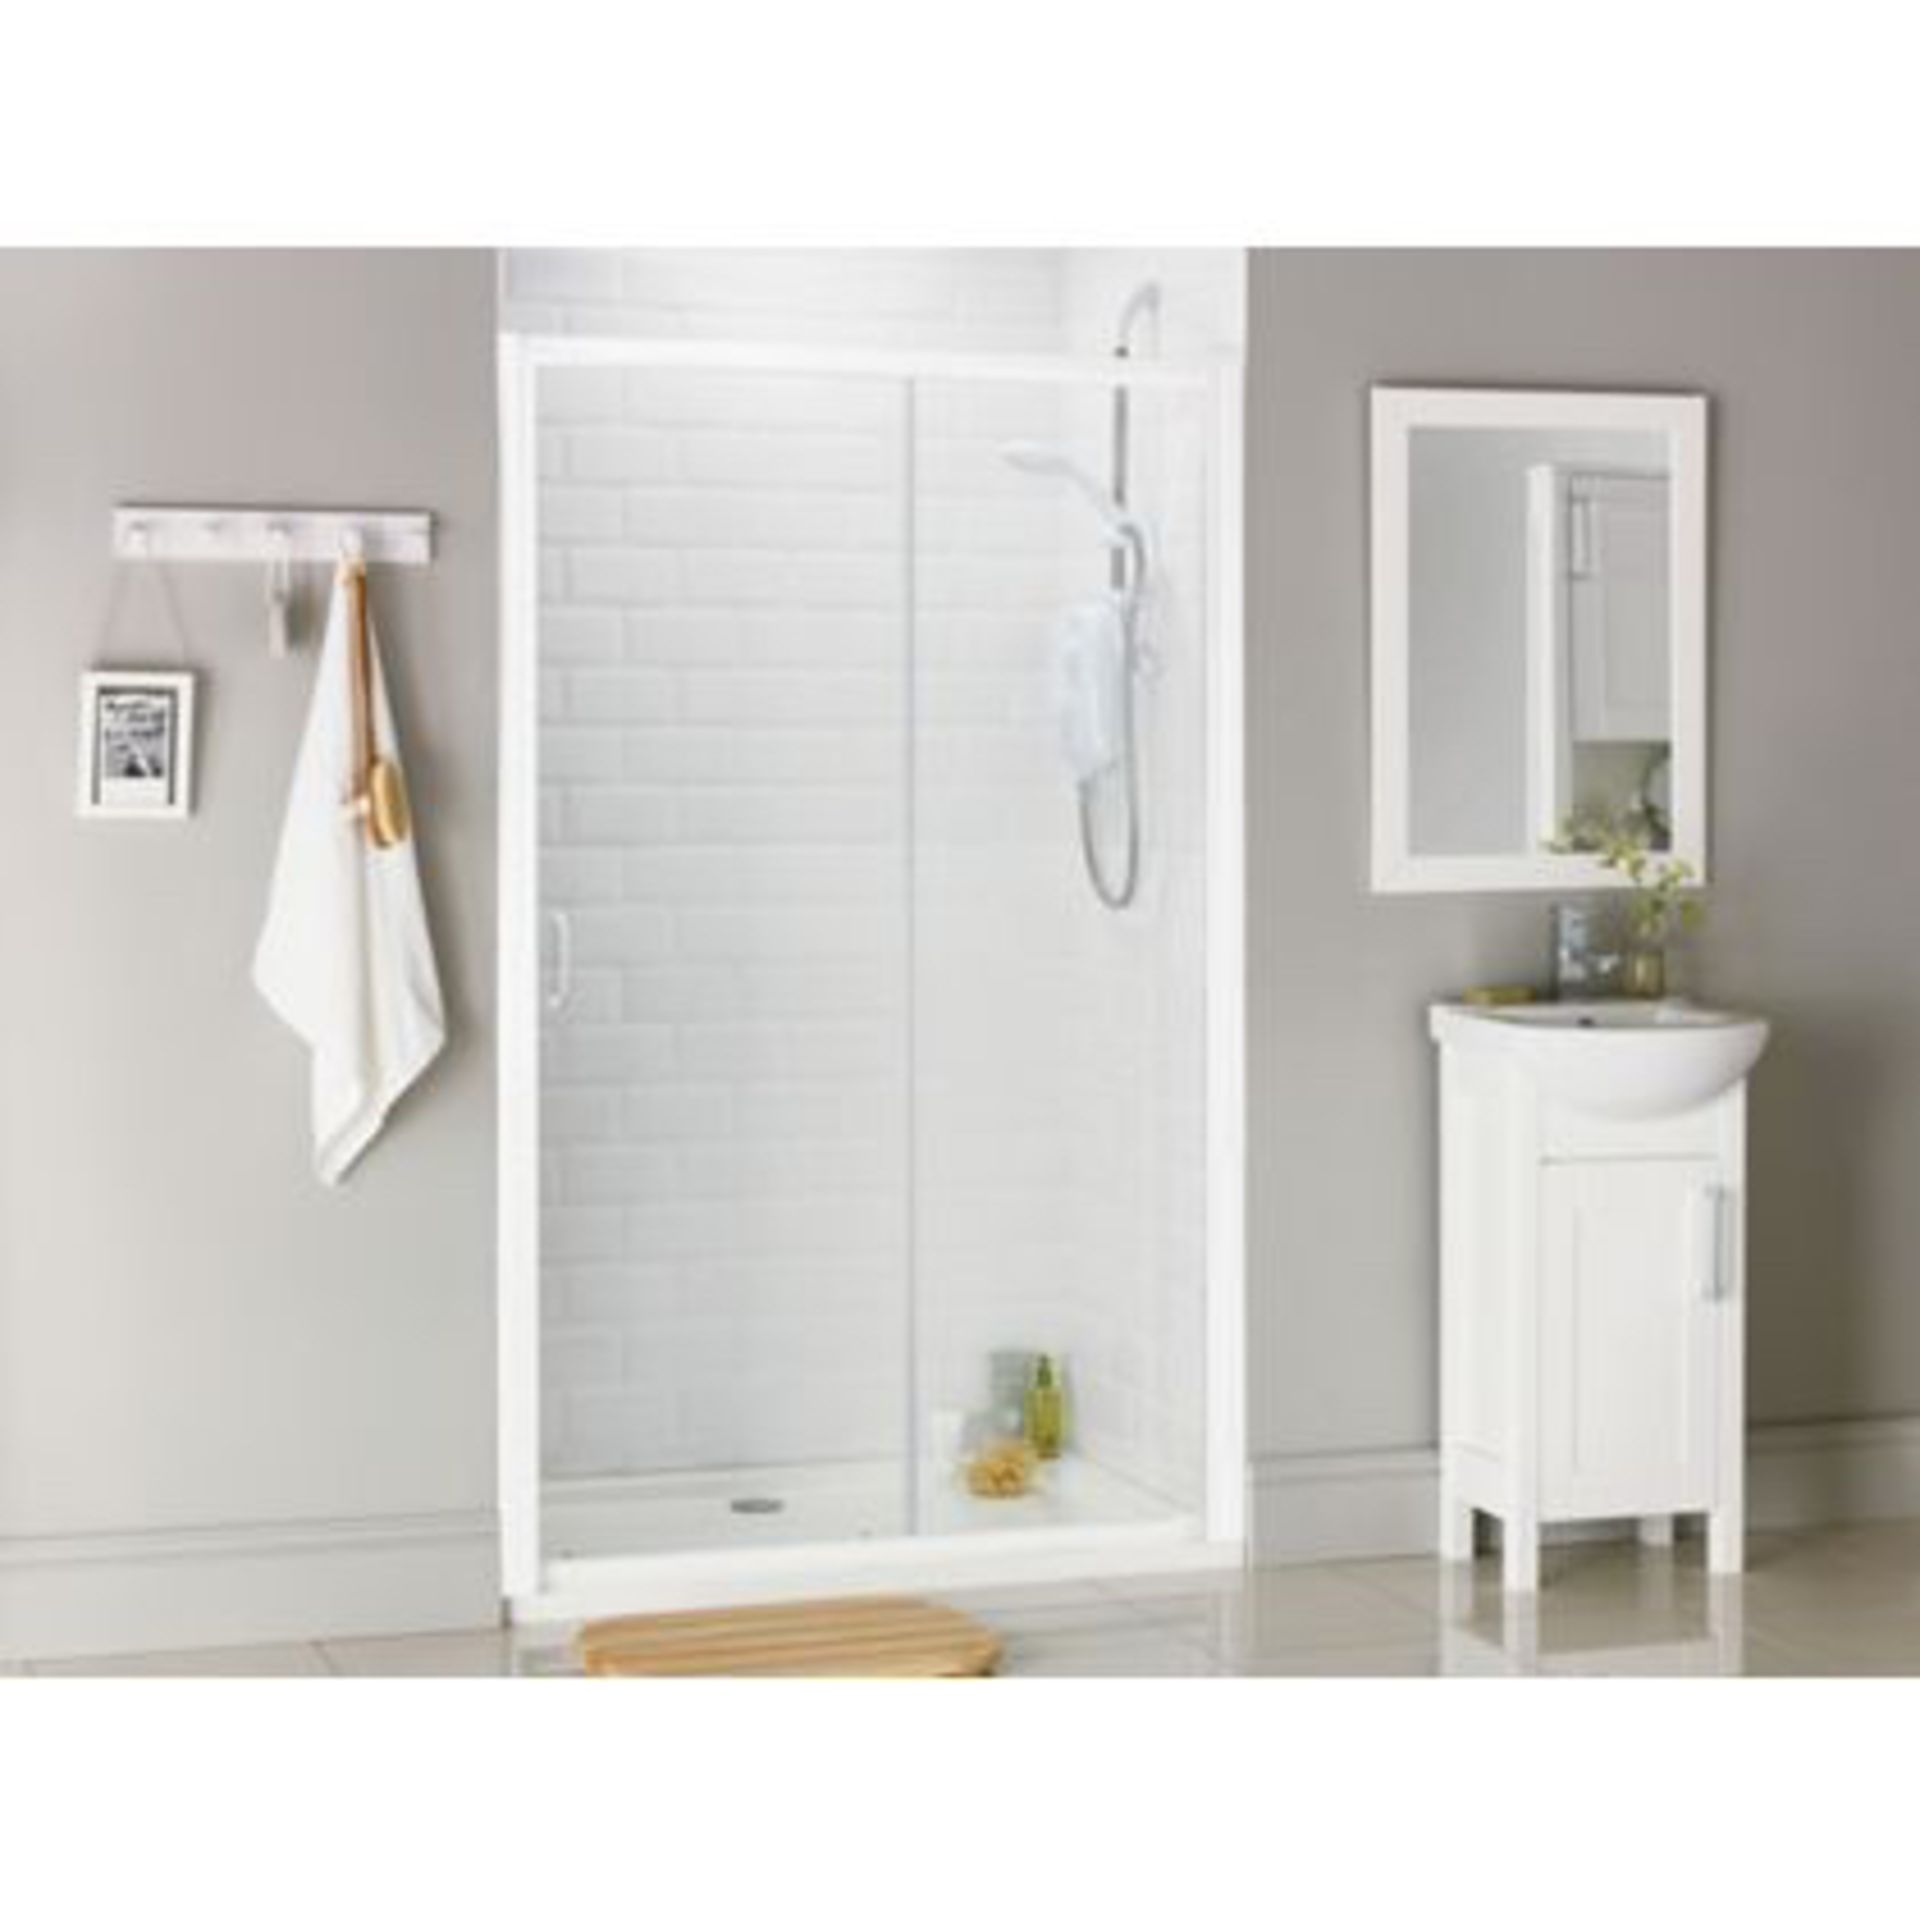 (AAA145) Aqualux Crystal Slider Recess Shower Enclosure - 1000mm. RRP £238.99. Brand New & Sealed.